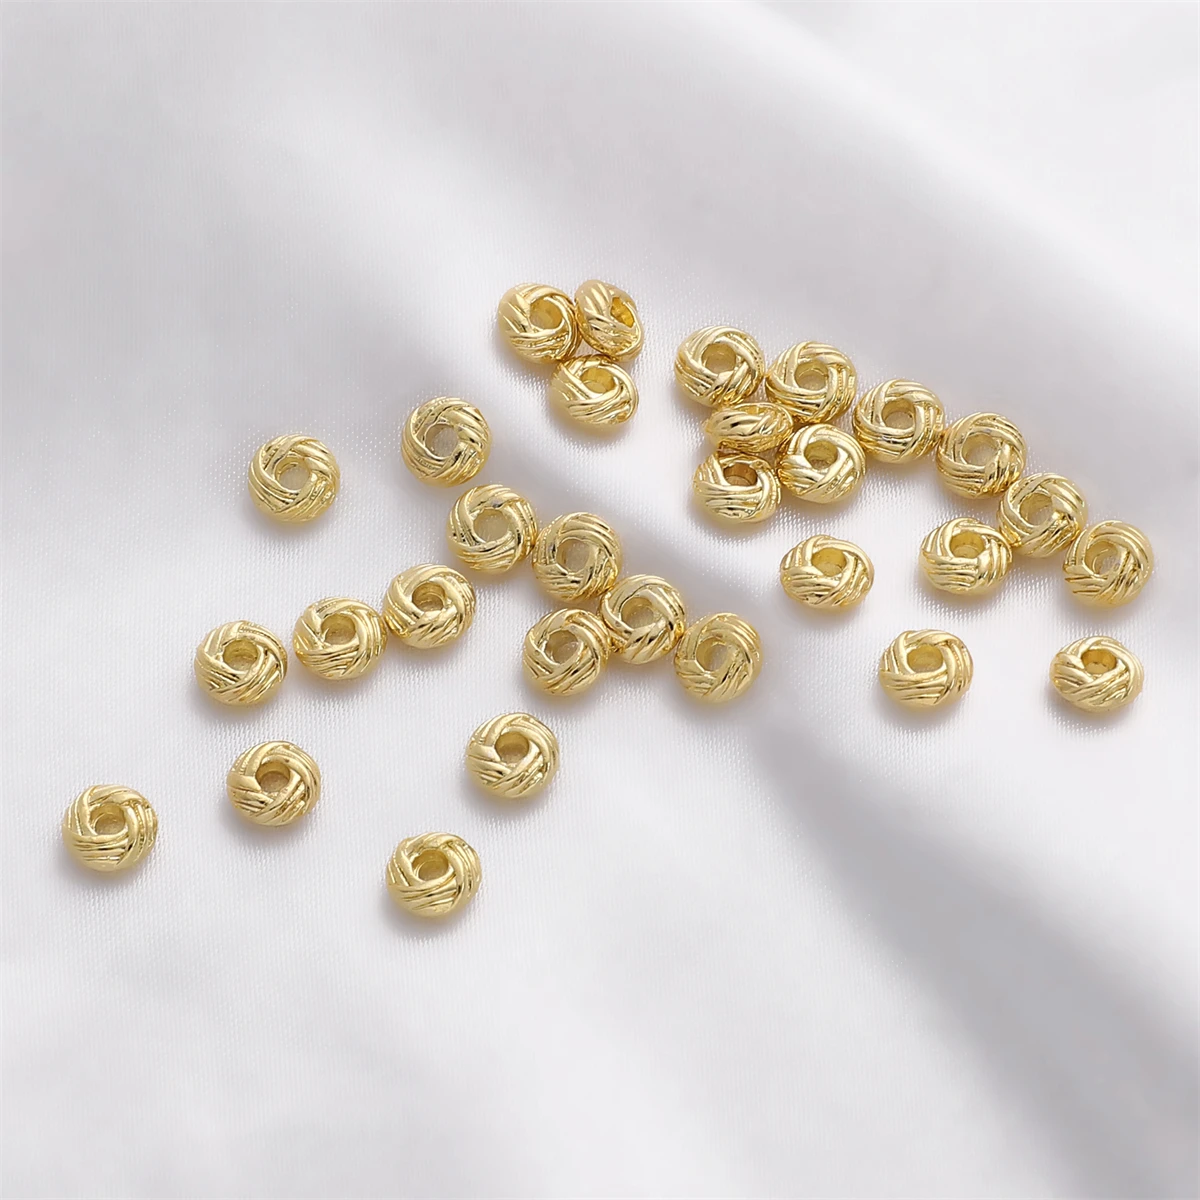 10pcs 14K Gold/Silver Plated 6mm Brass Pineapple Knot Spacer Beads for Necklace Bracelet Women's DIY Making Jewelly Findings